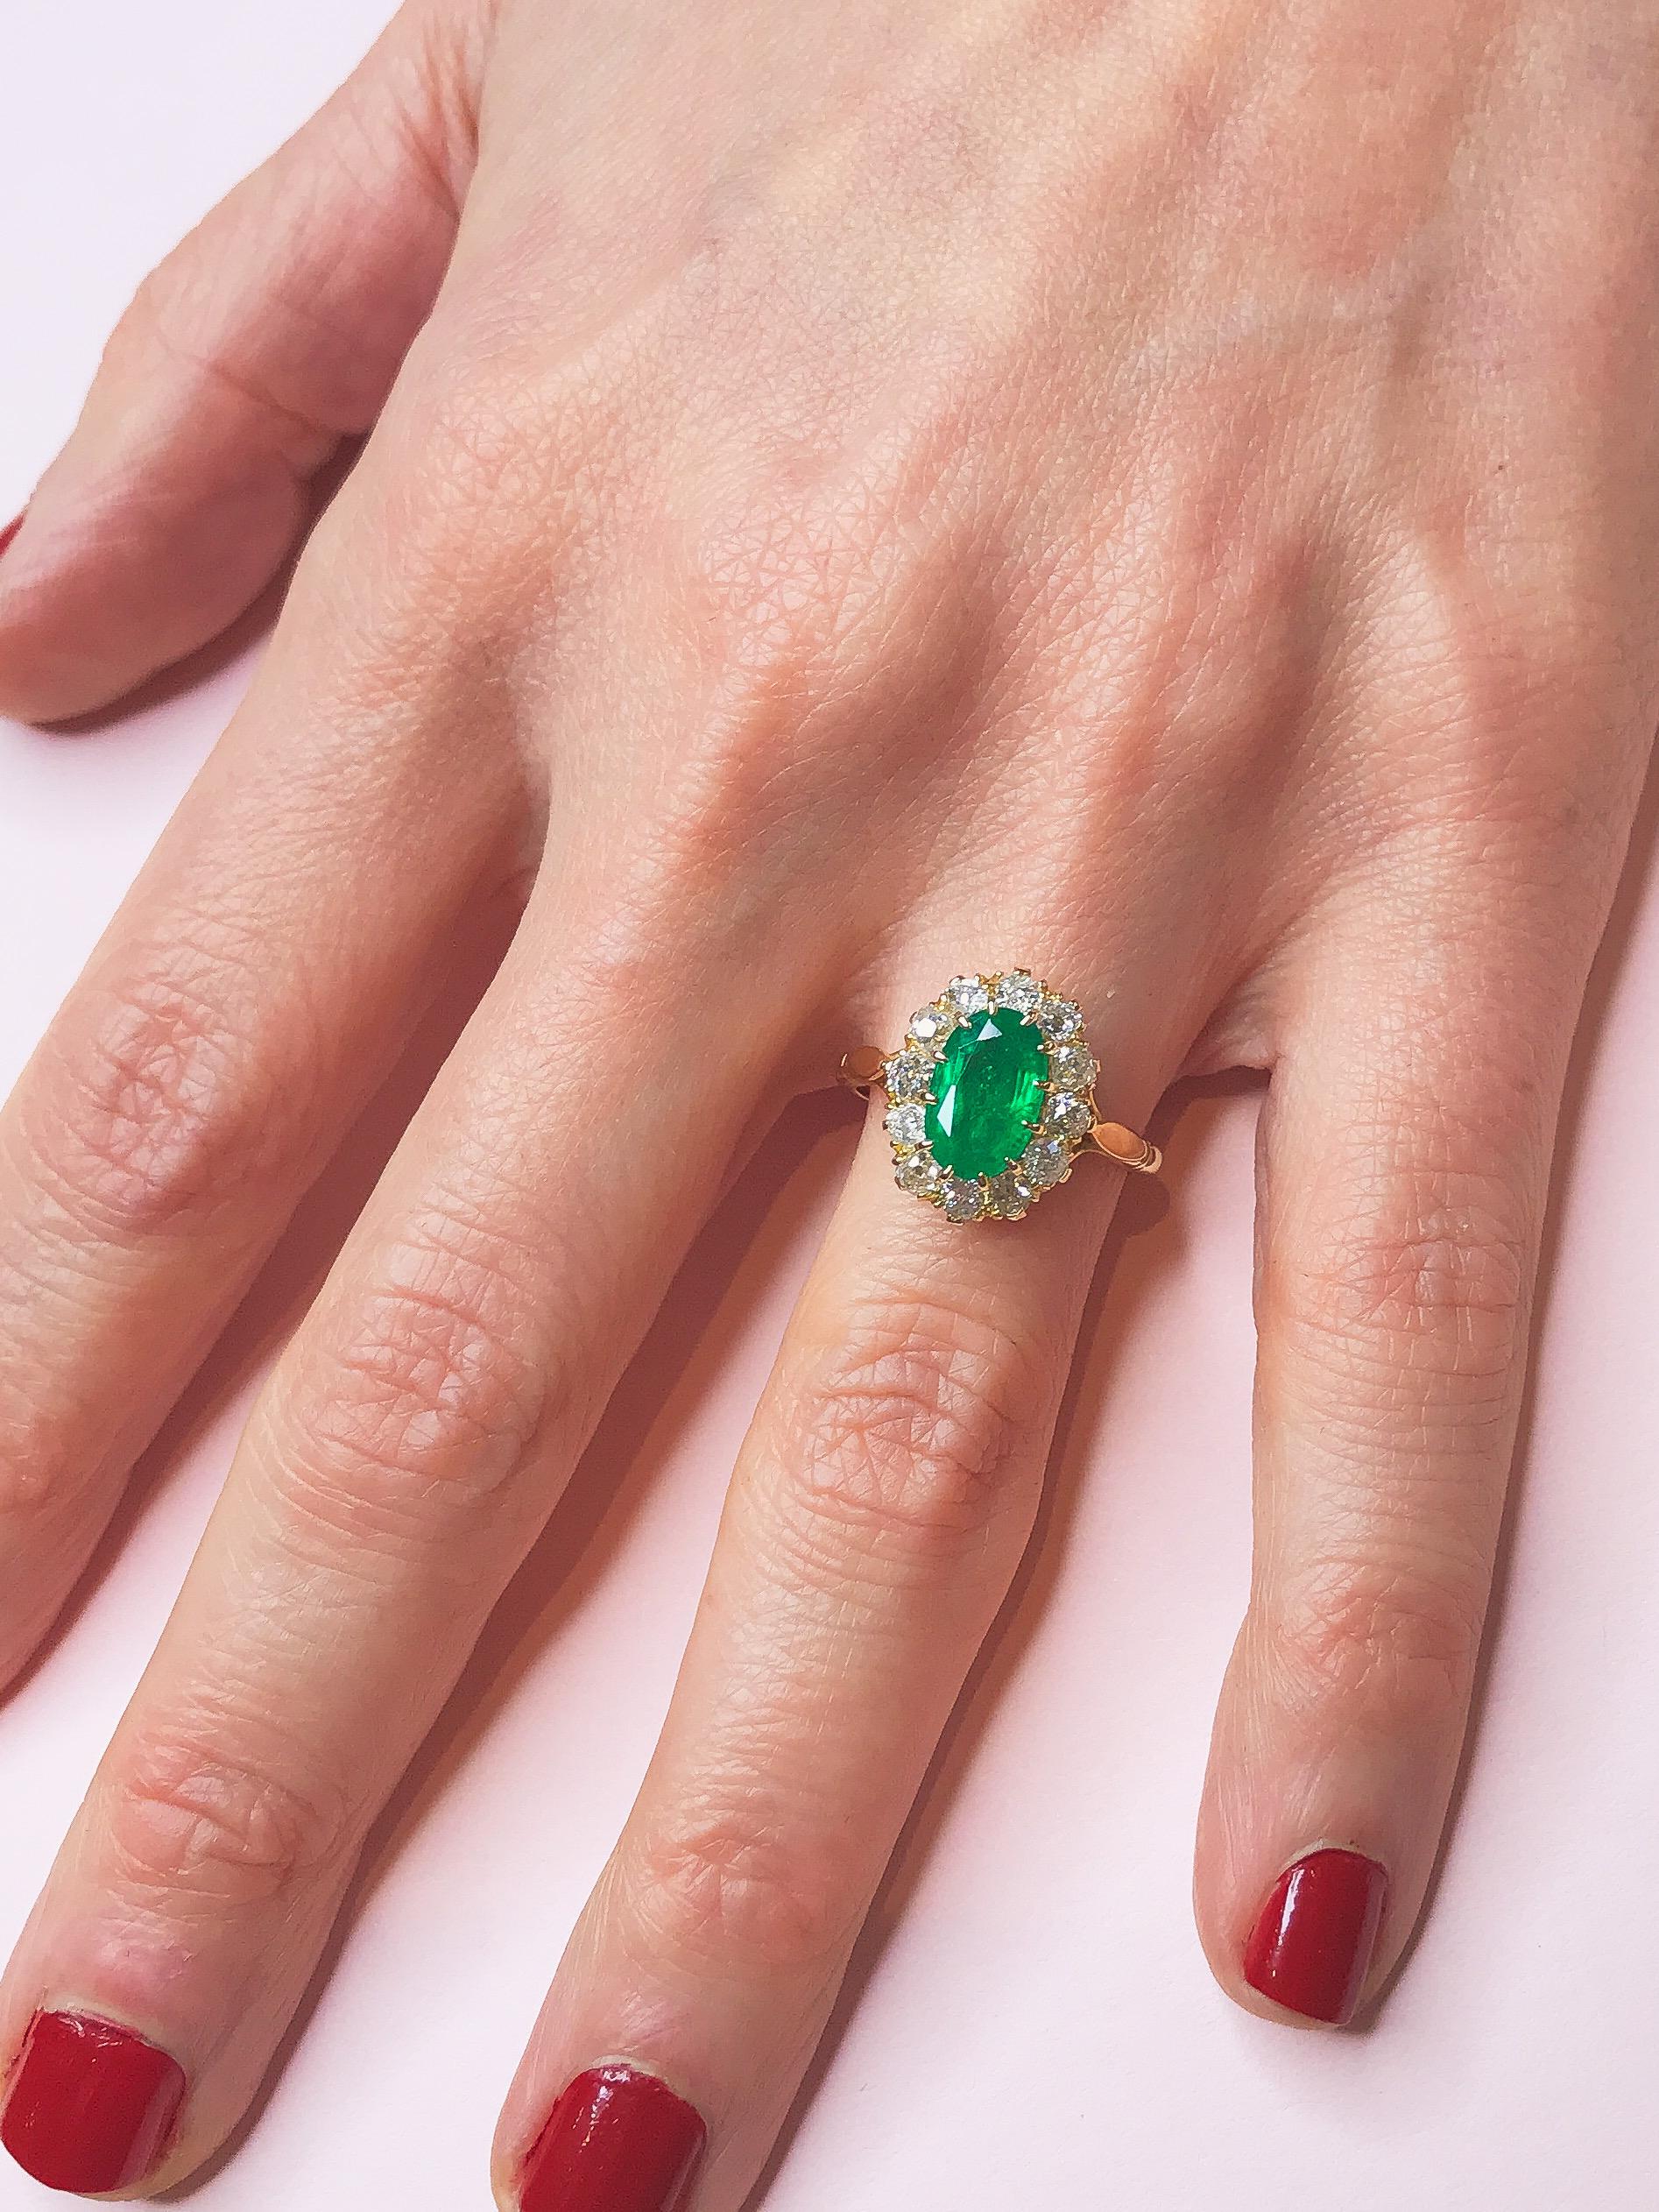 Handmade by the Haruni family, this bright and bold ring is truly one of a kind. Its centre emerald is an intense, rich green and is cut in a classic oval shape. Small brilliant cut white diamonds are mounted around it, enhancing its colour and